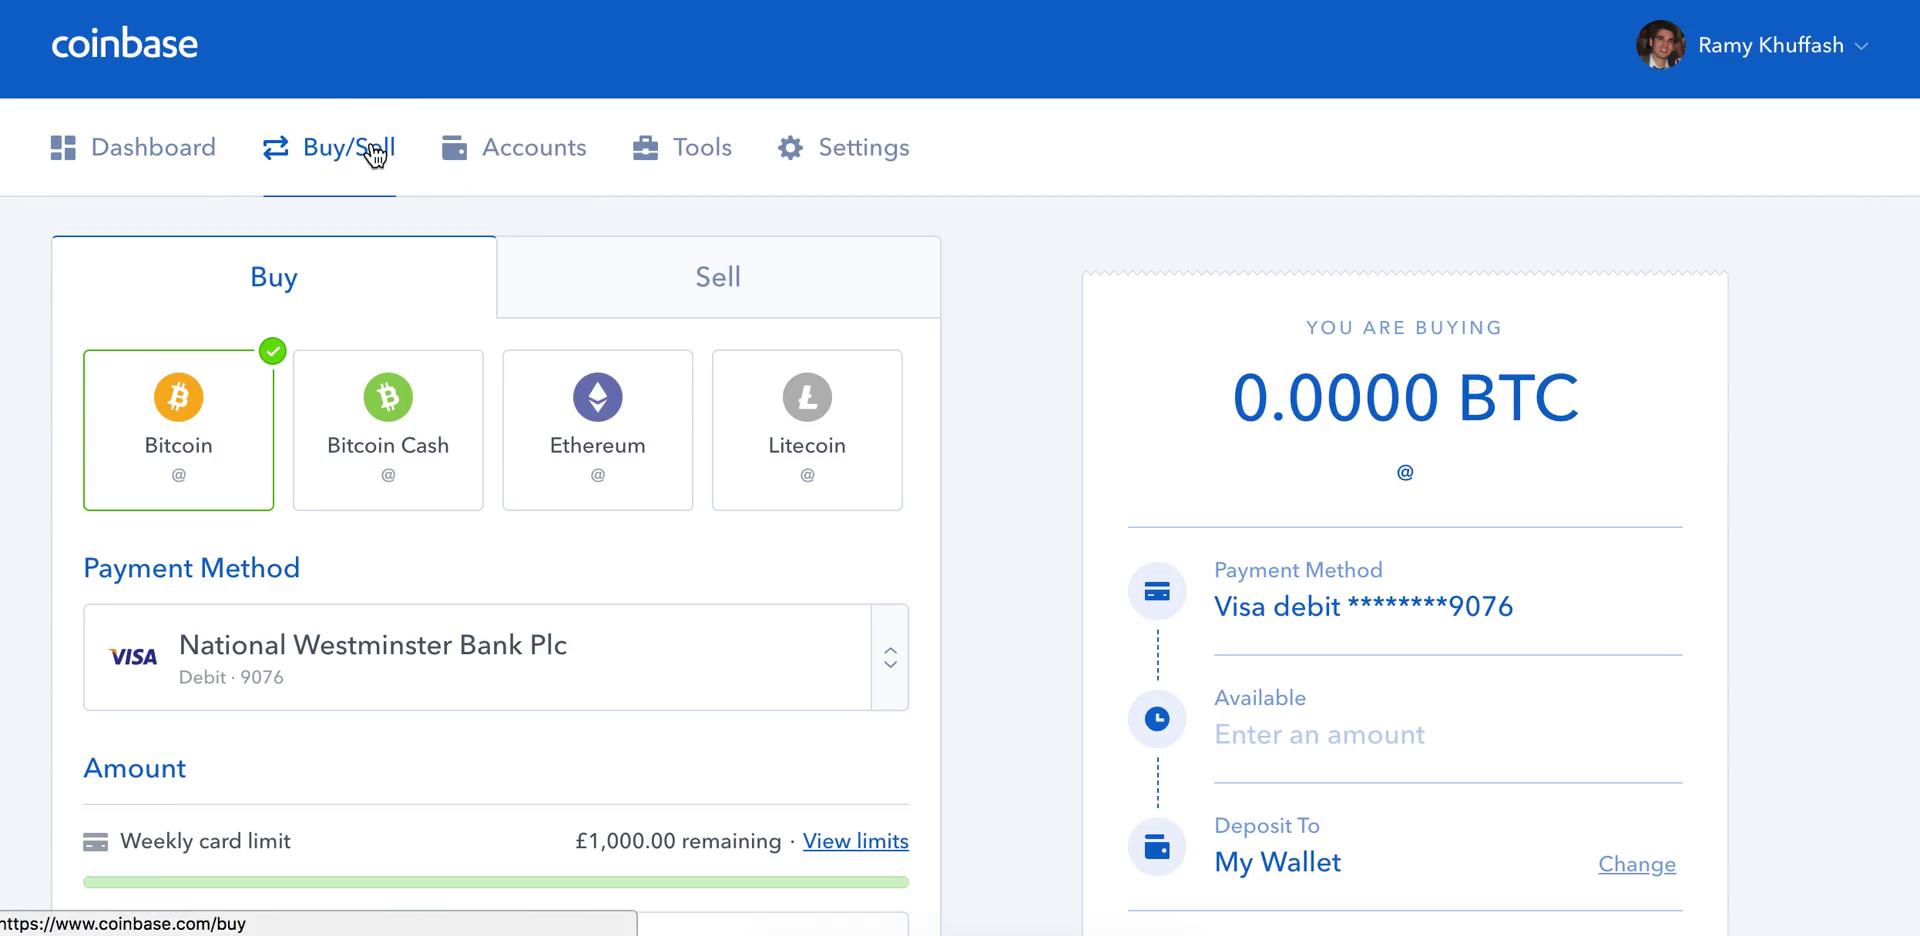 connection problem when im trying to buy crypto on coinbase